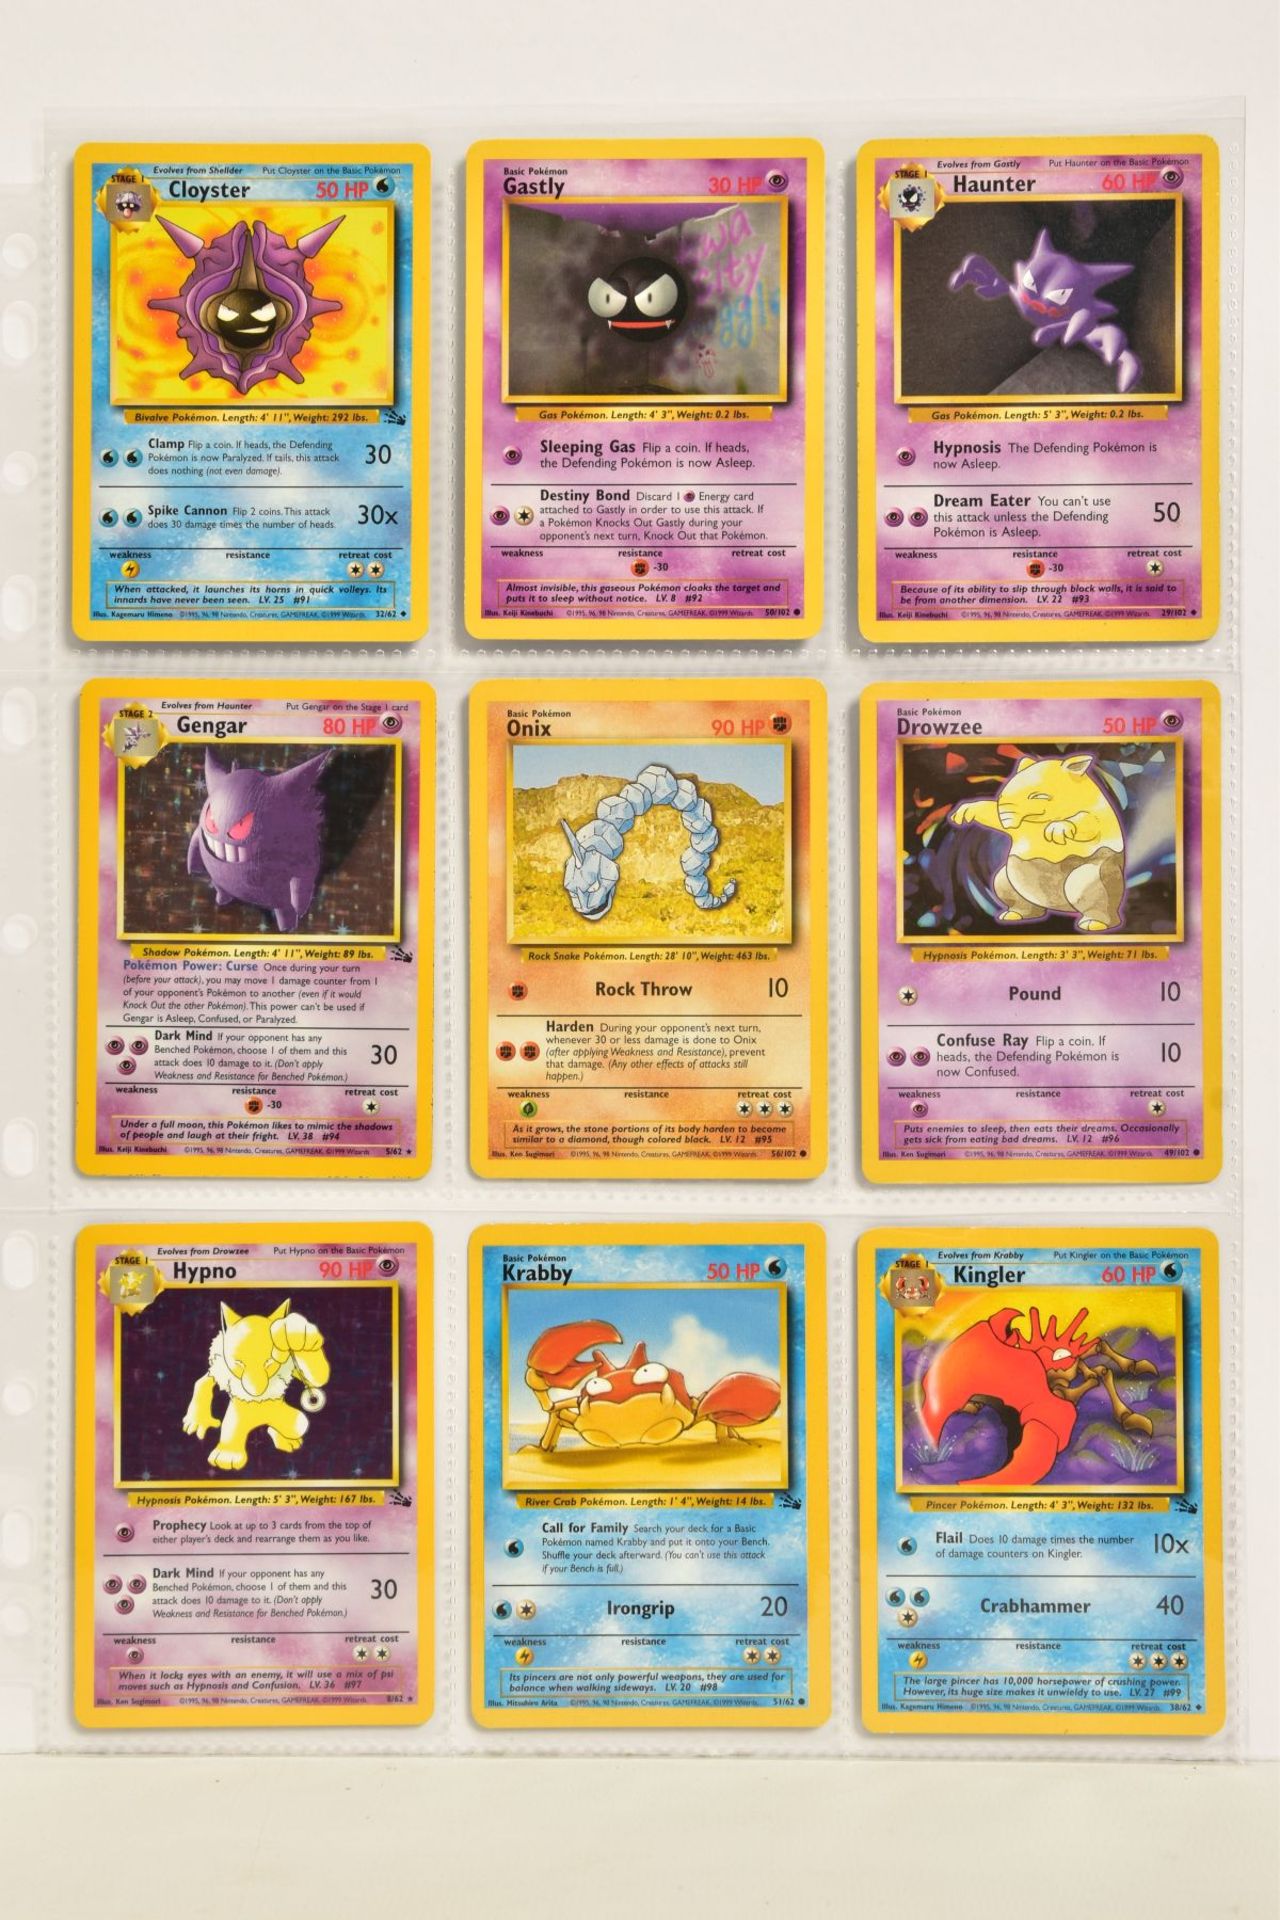 POKEMON THE TRADING CARD GAME 154 CARDS IN POKEMON TCG FOLDER, includes one of each of the - Image 12 of 20